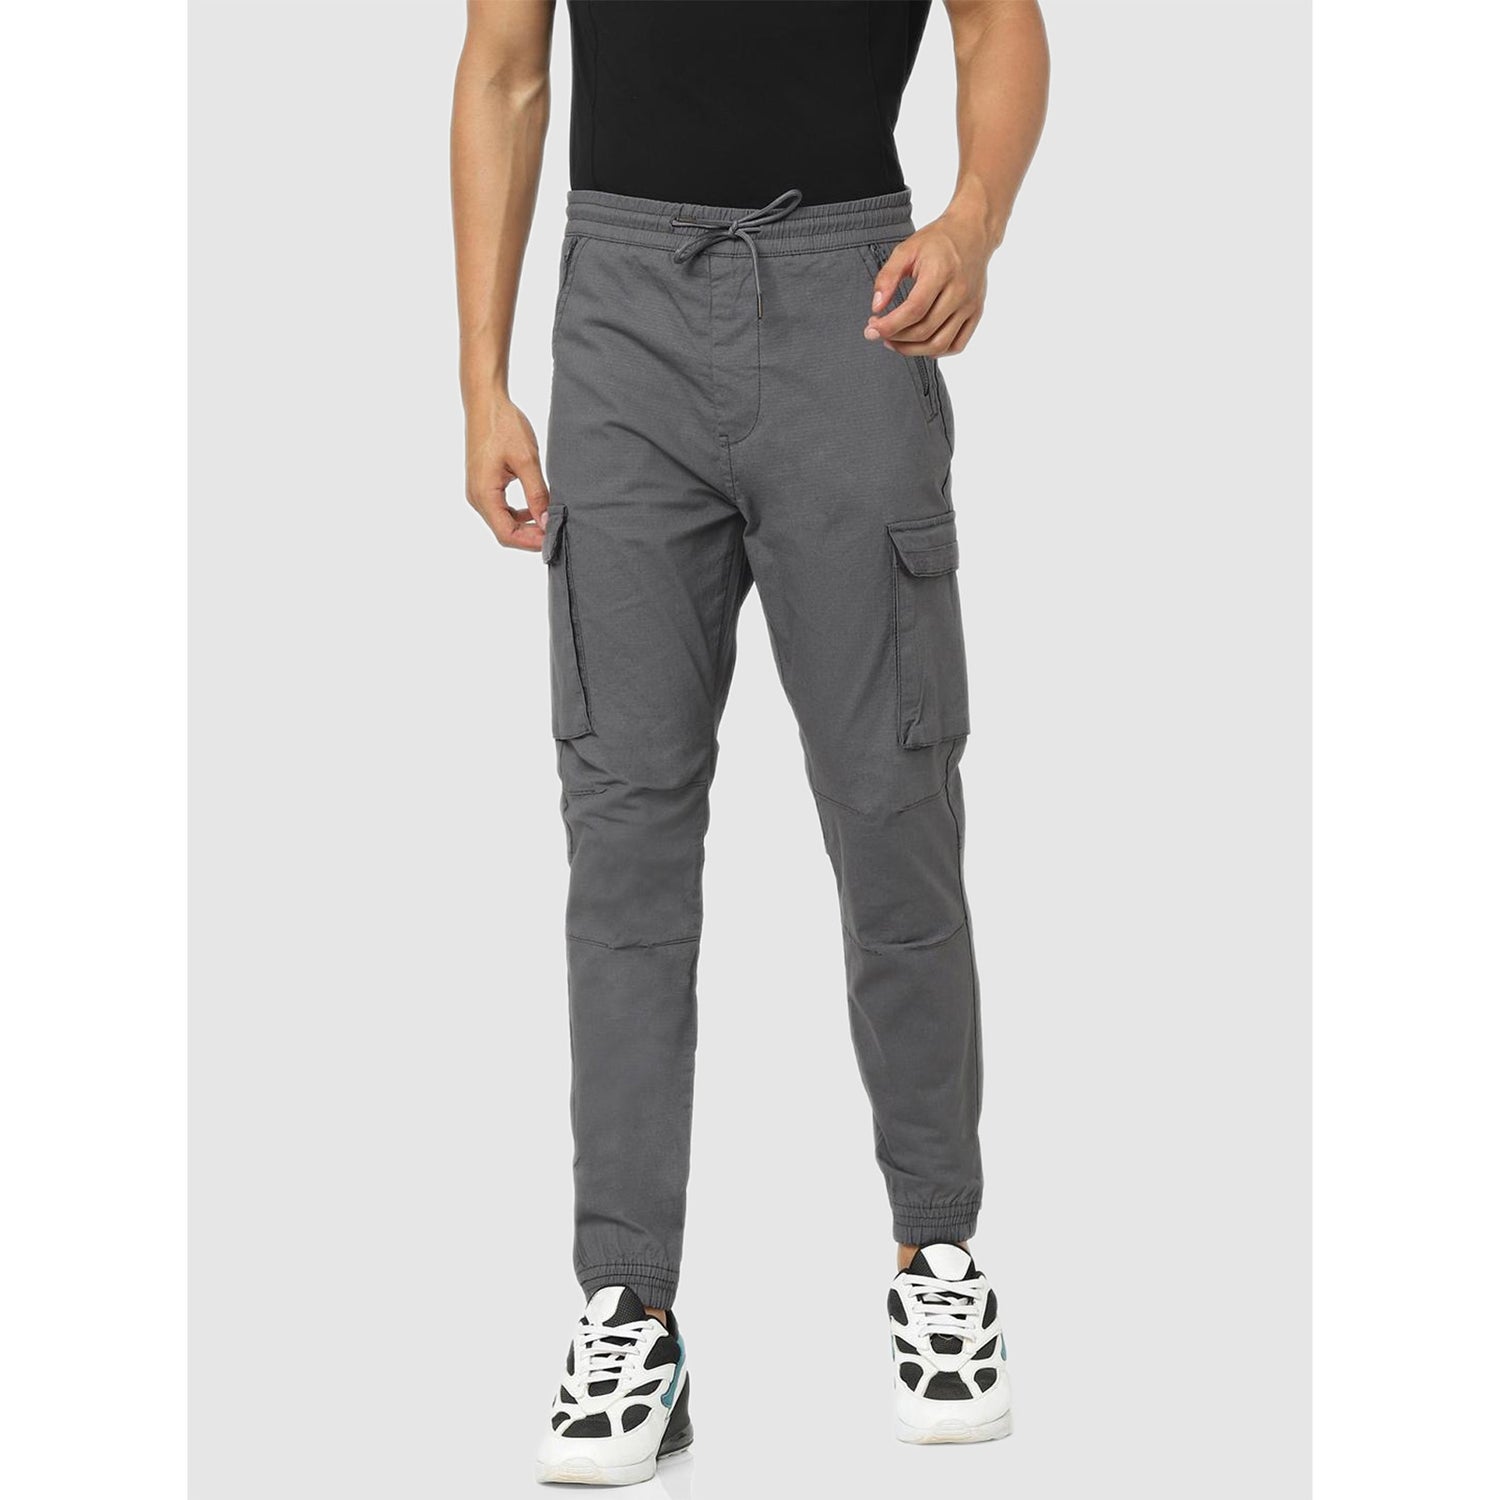 Grey Classic Cargos Trousers (COZIP)